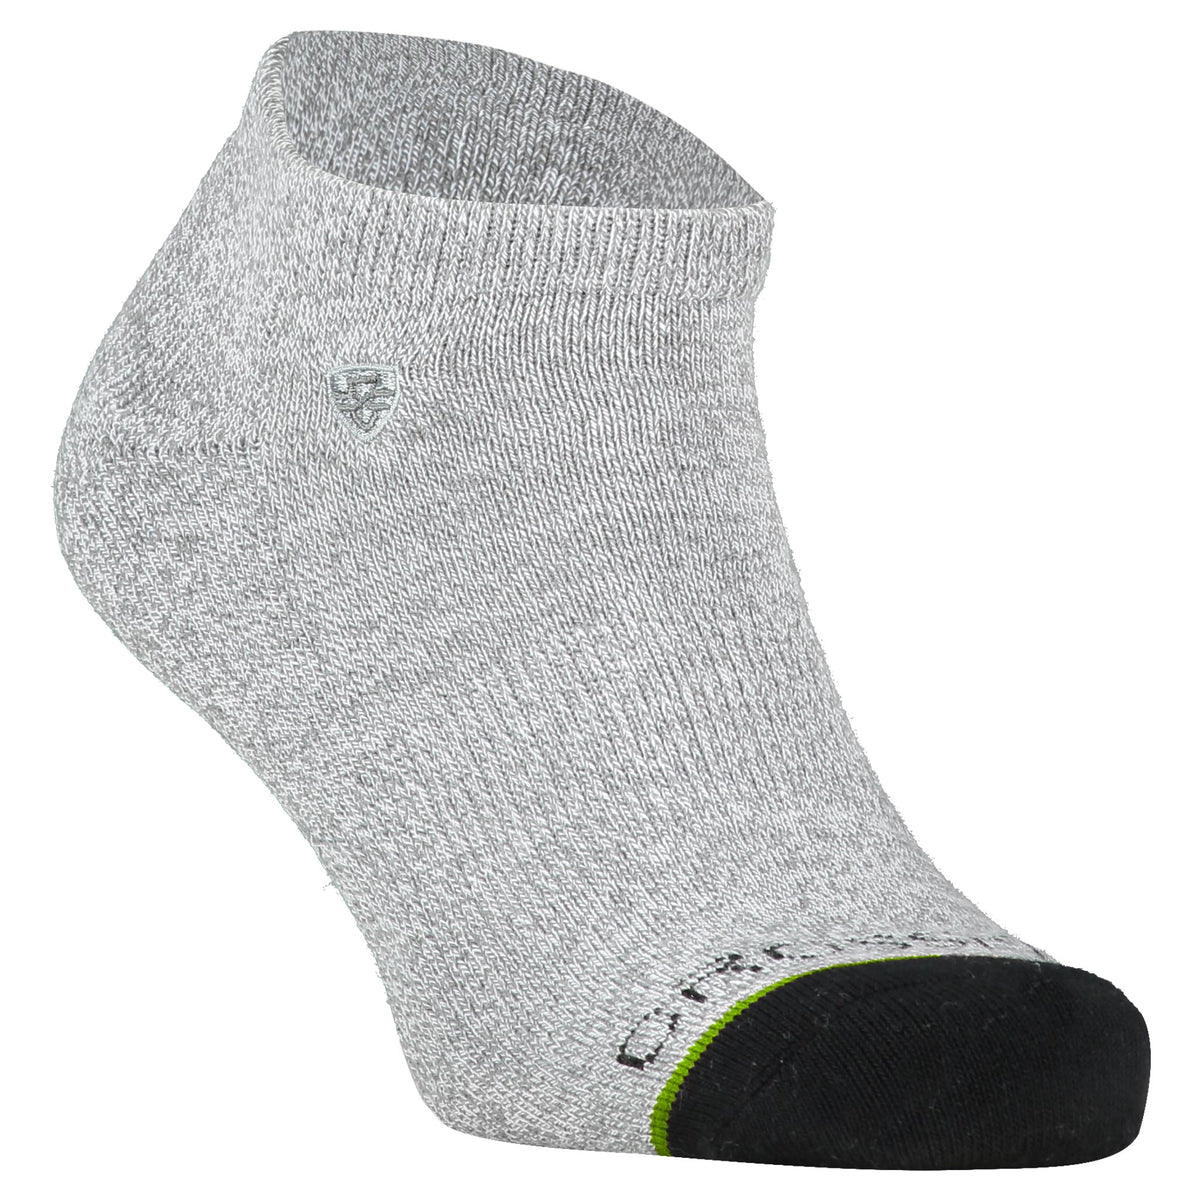 Crossfly men&#39;s Original Low Socks in grey from the Everyday series, featuring Flat Toe Seams and 360 Hold.